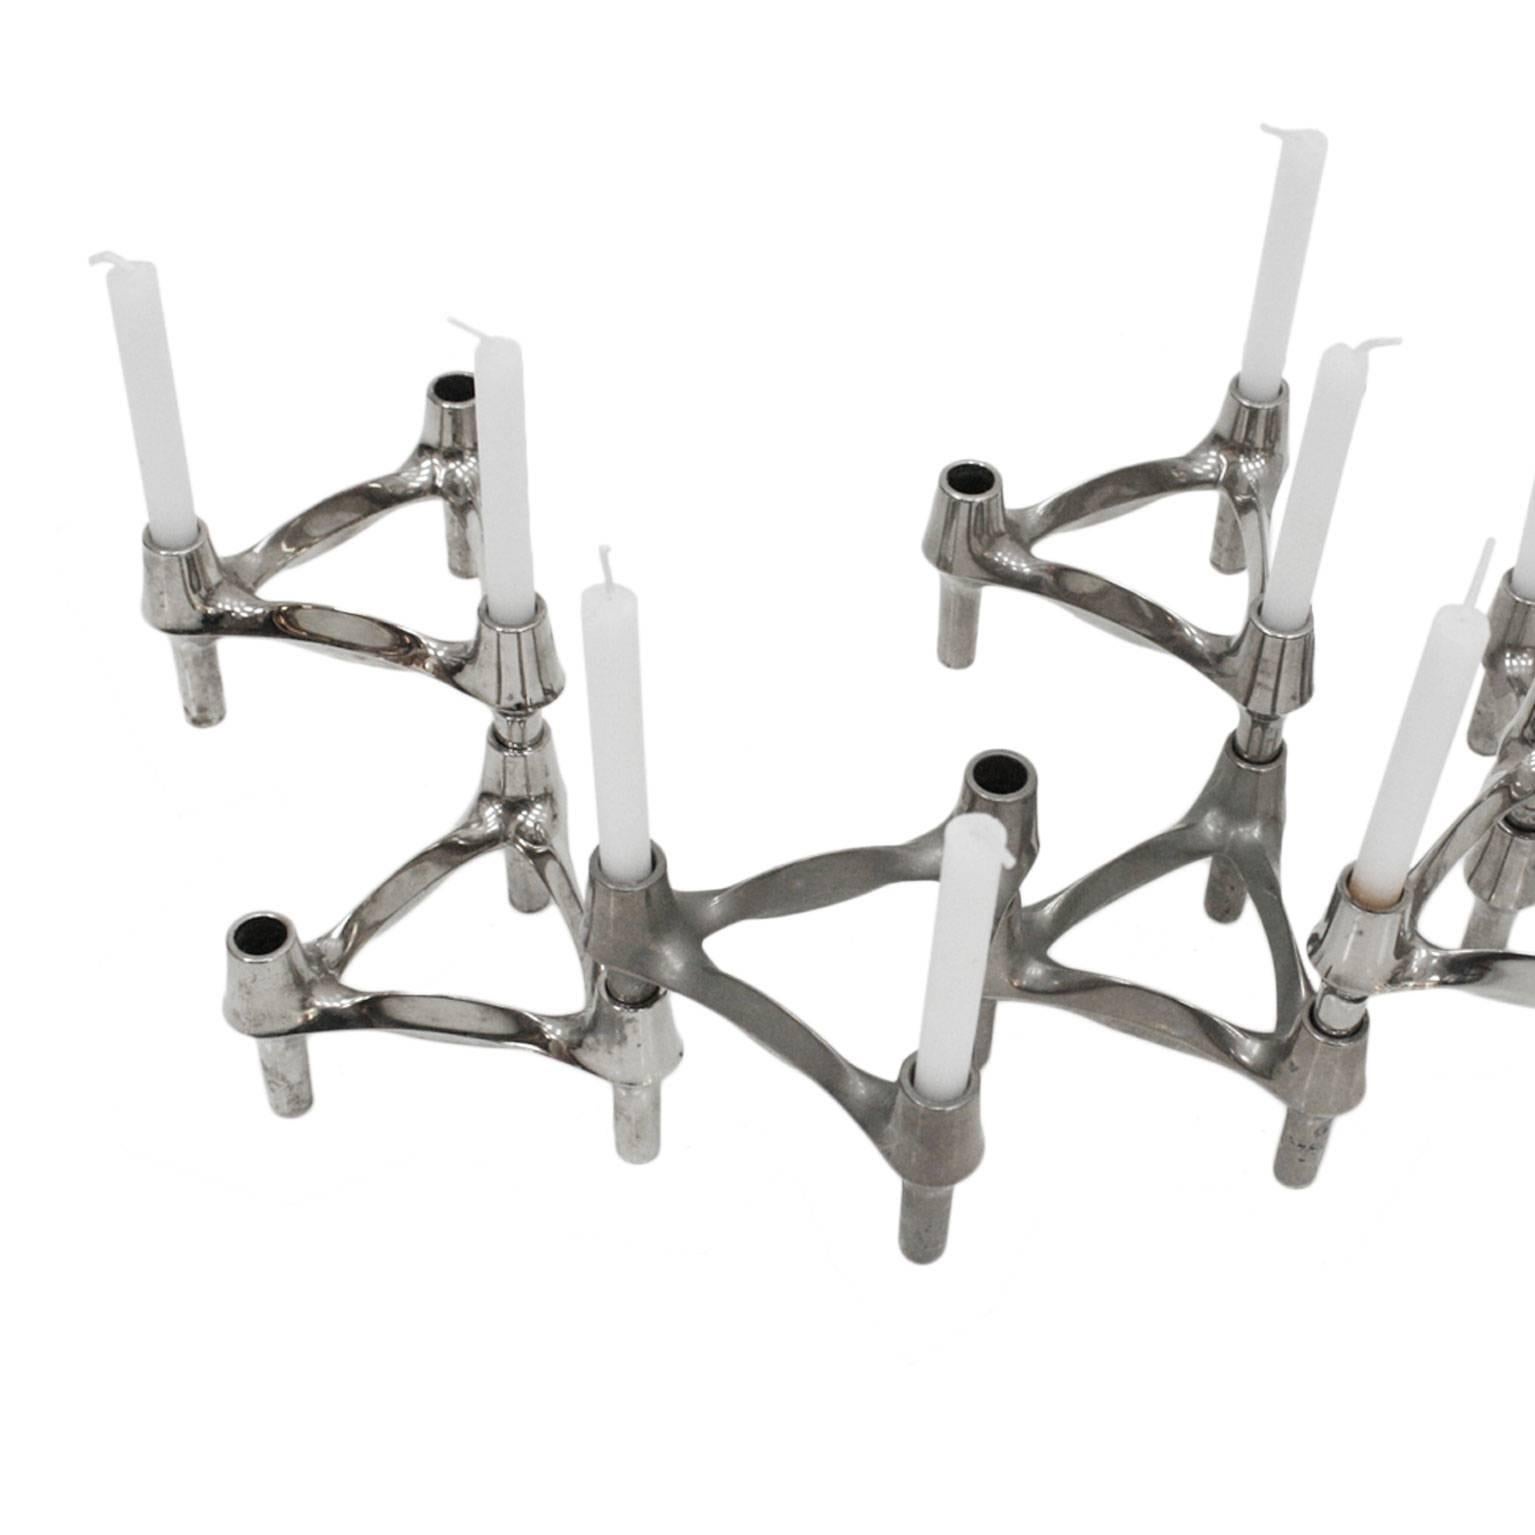 Set of twenty pieces of candelabras designed by Caesar Stoffi. Made in steel with geometric shapes, Germany, 1950.